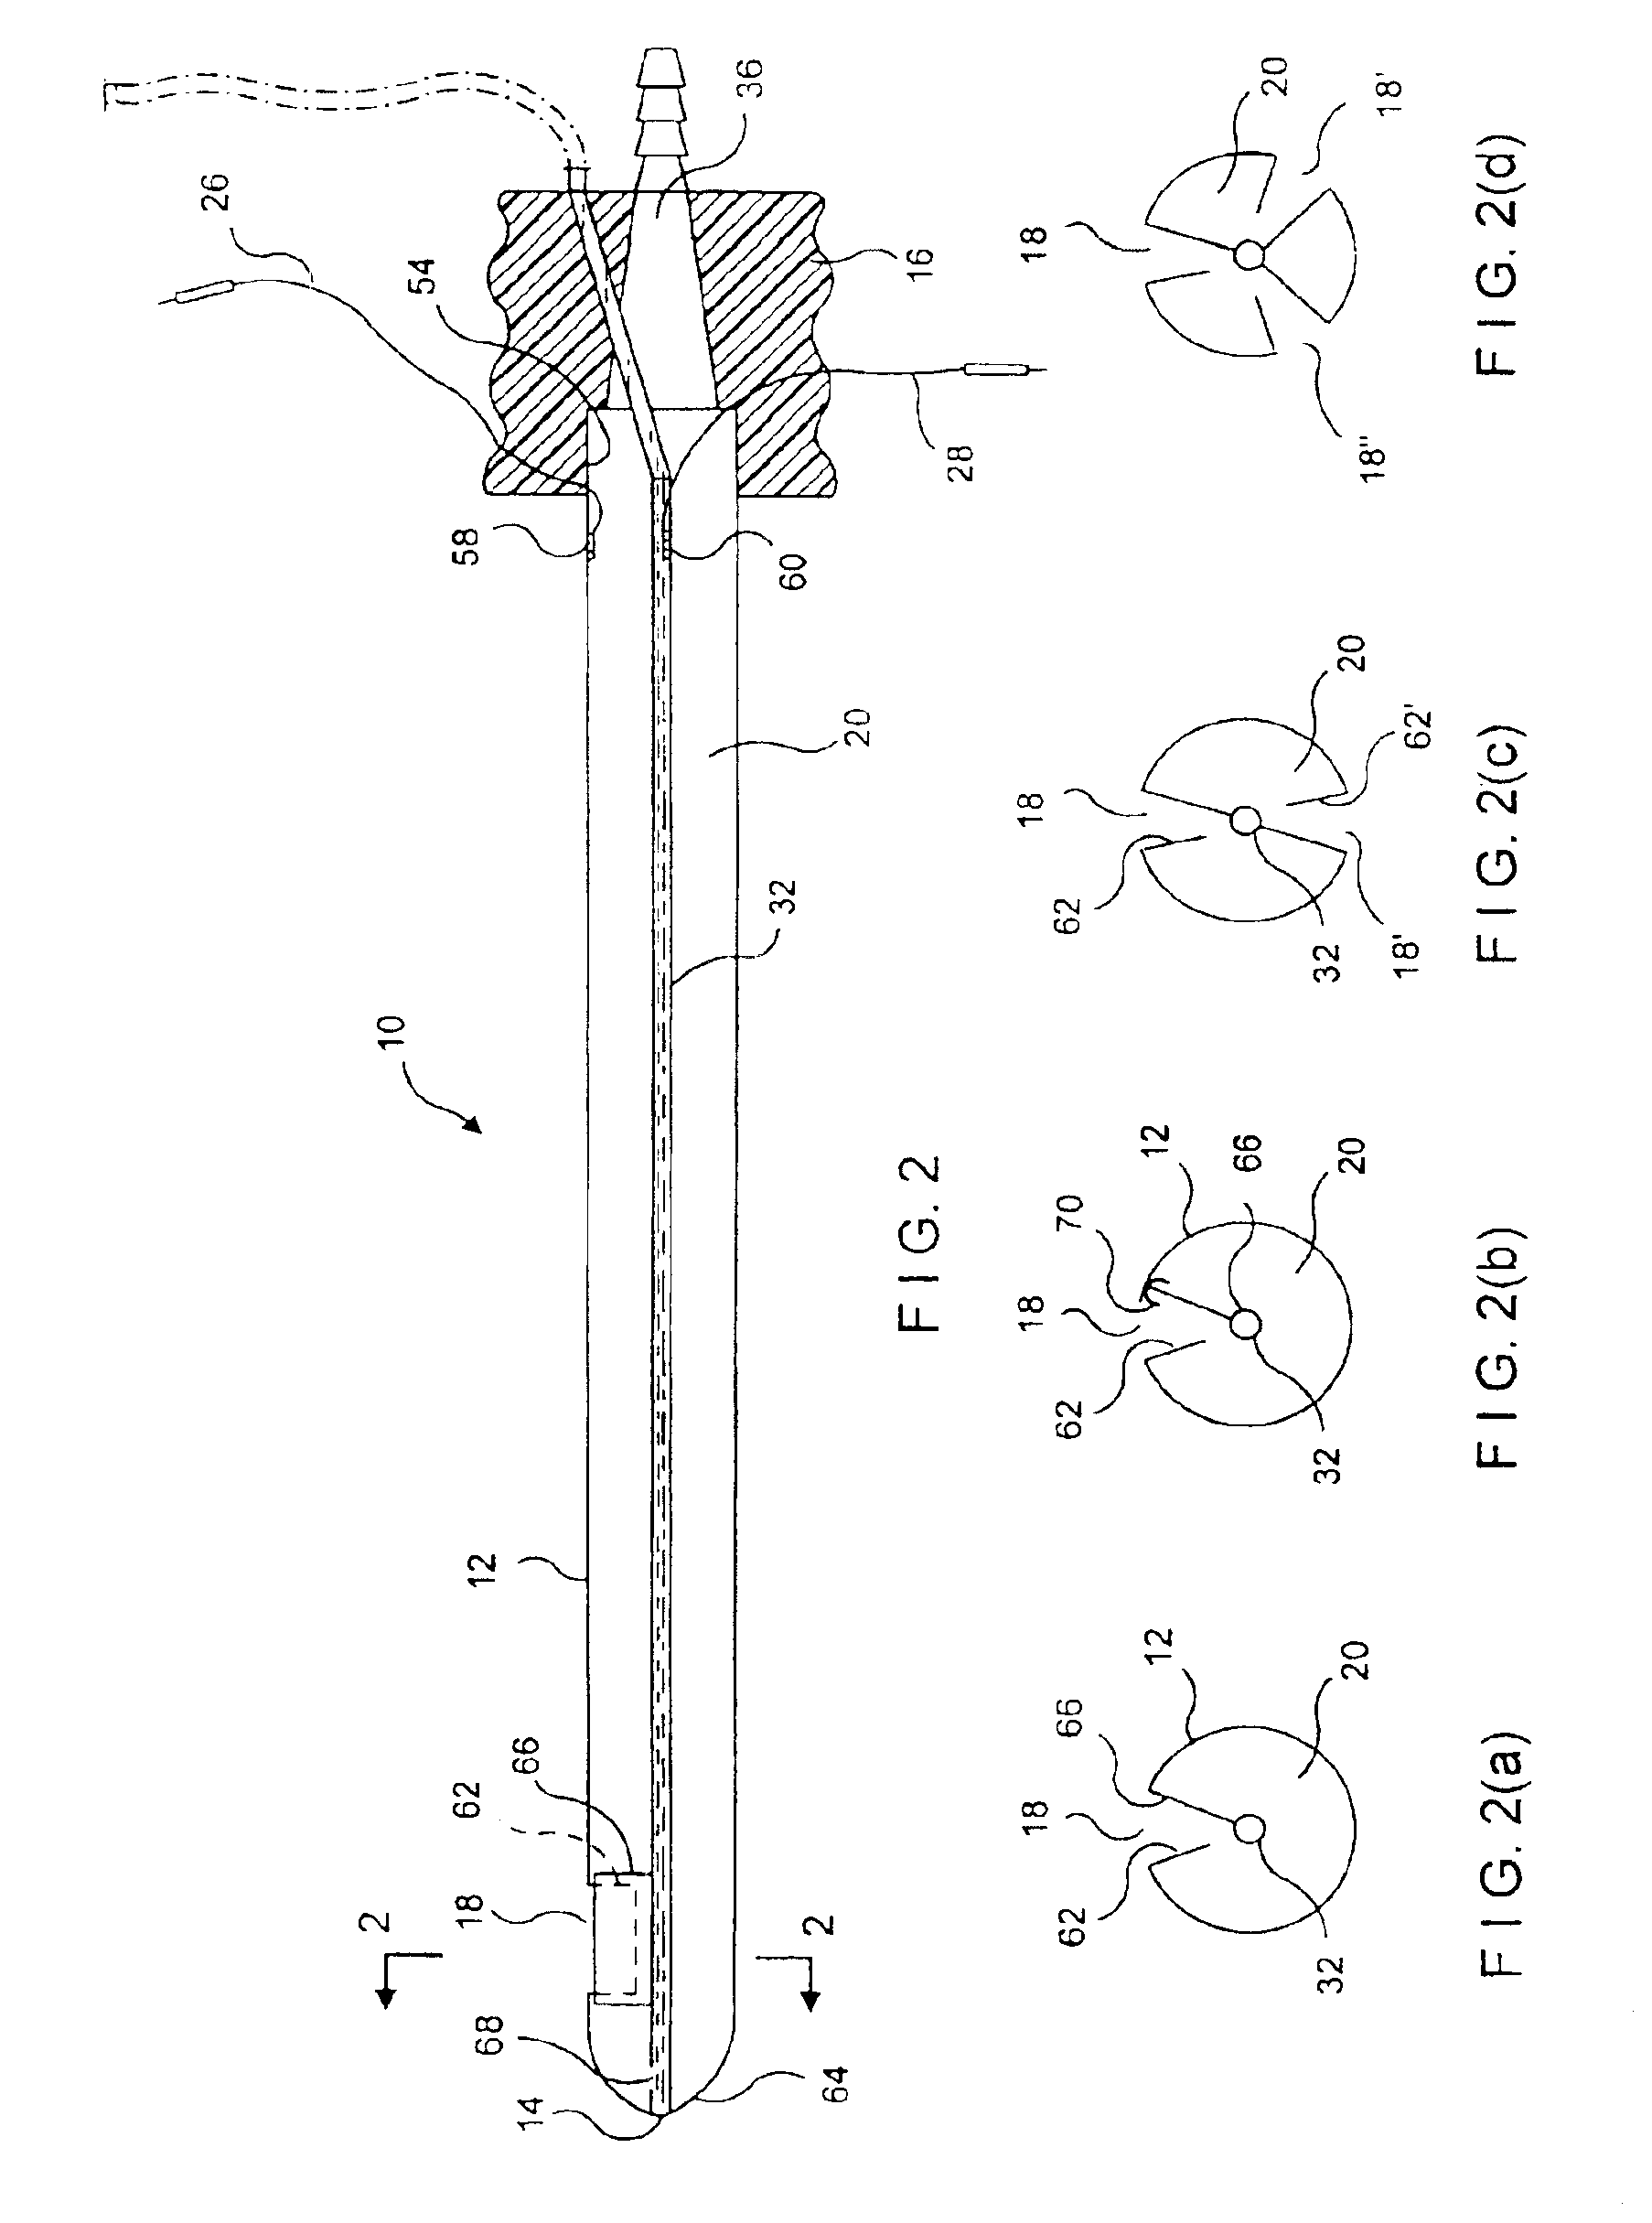 Device for suction-assisted lipectomy and method of using same